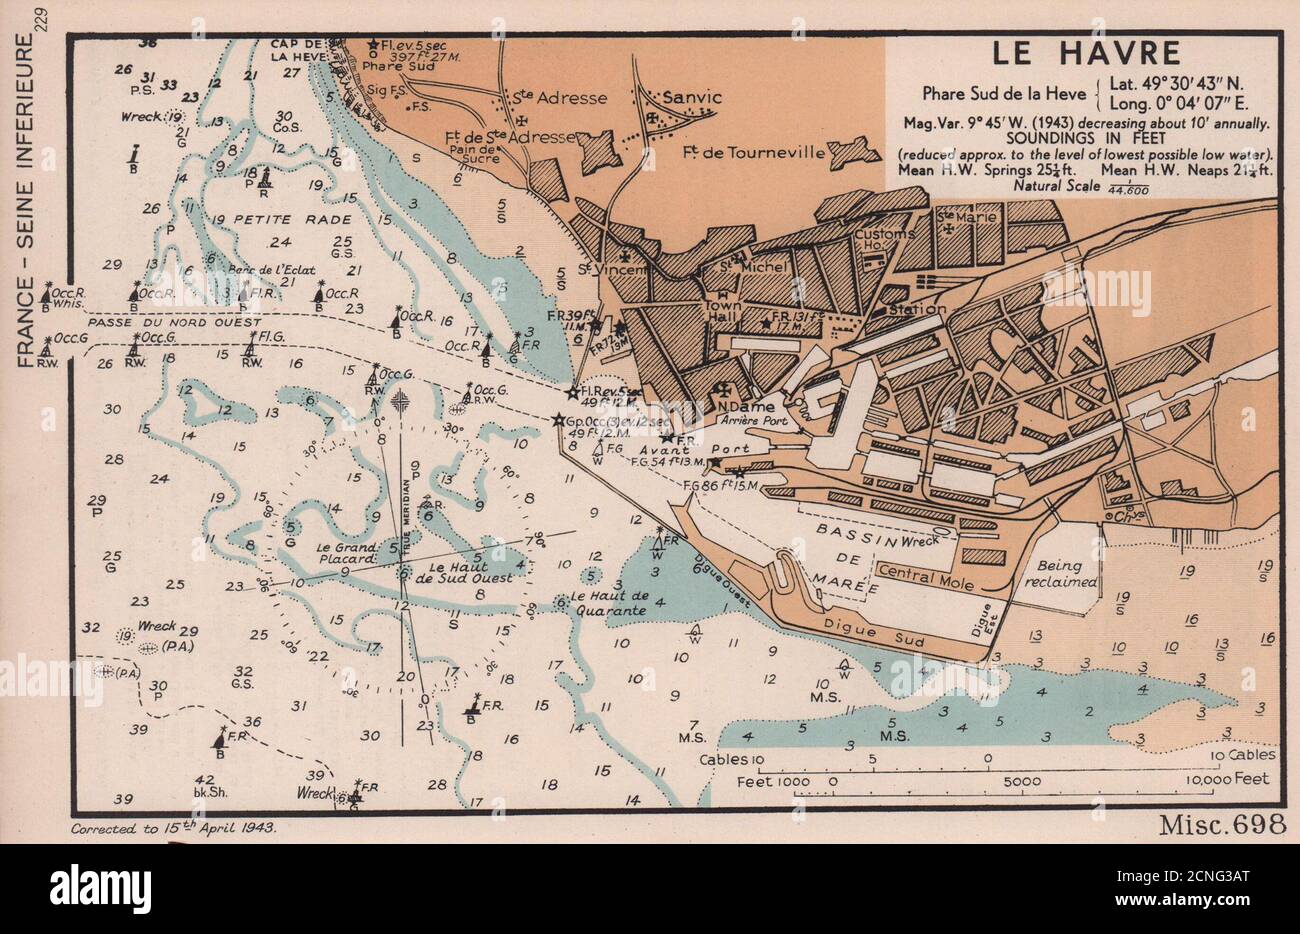 Le Havre town plan & sea coast chart. D-Day planning map. ADMIRALTY 1943 Stock Photo